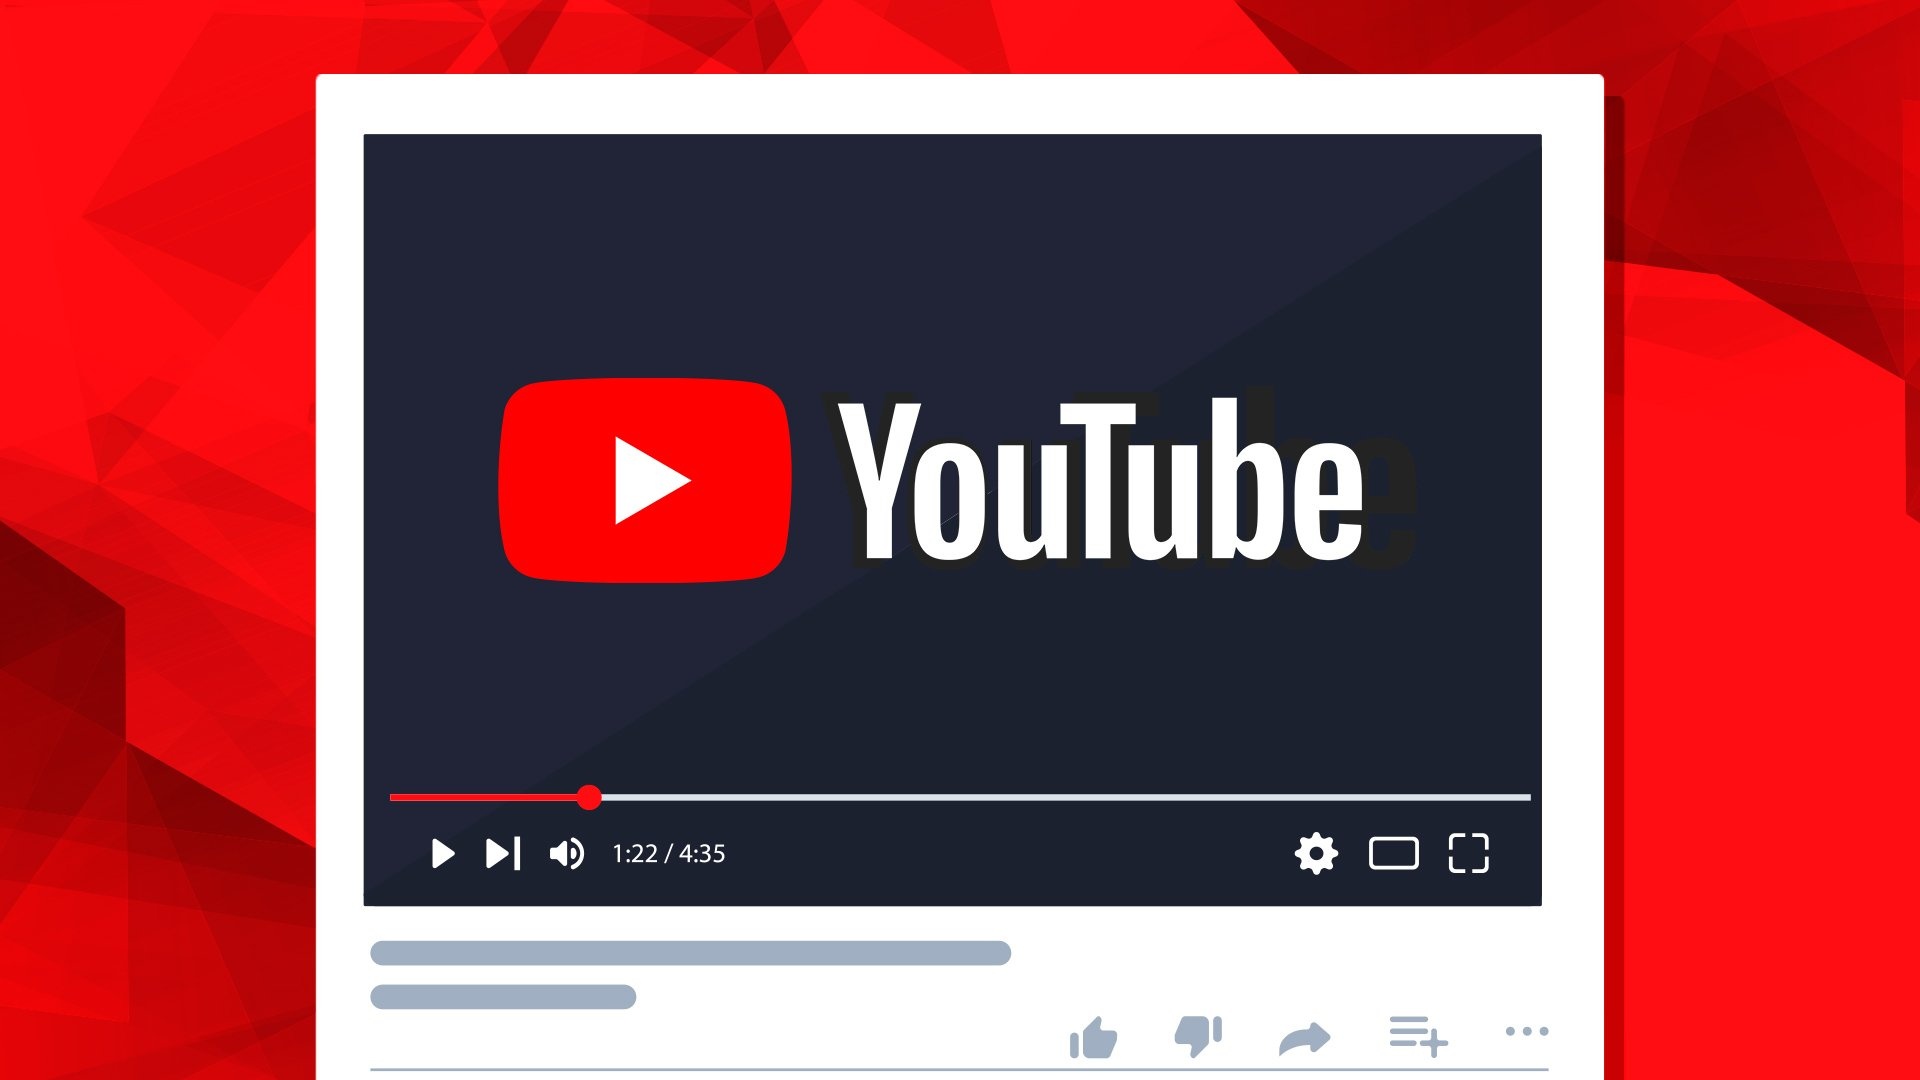 YouTube: The second-largest search engine behind Google Search, Video. 1920x1080 Full HD Wallpaper.